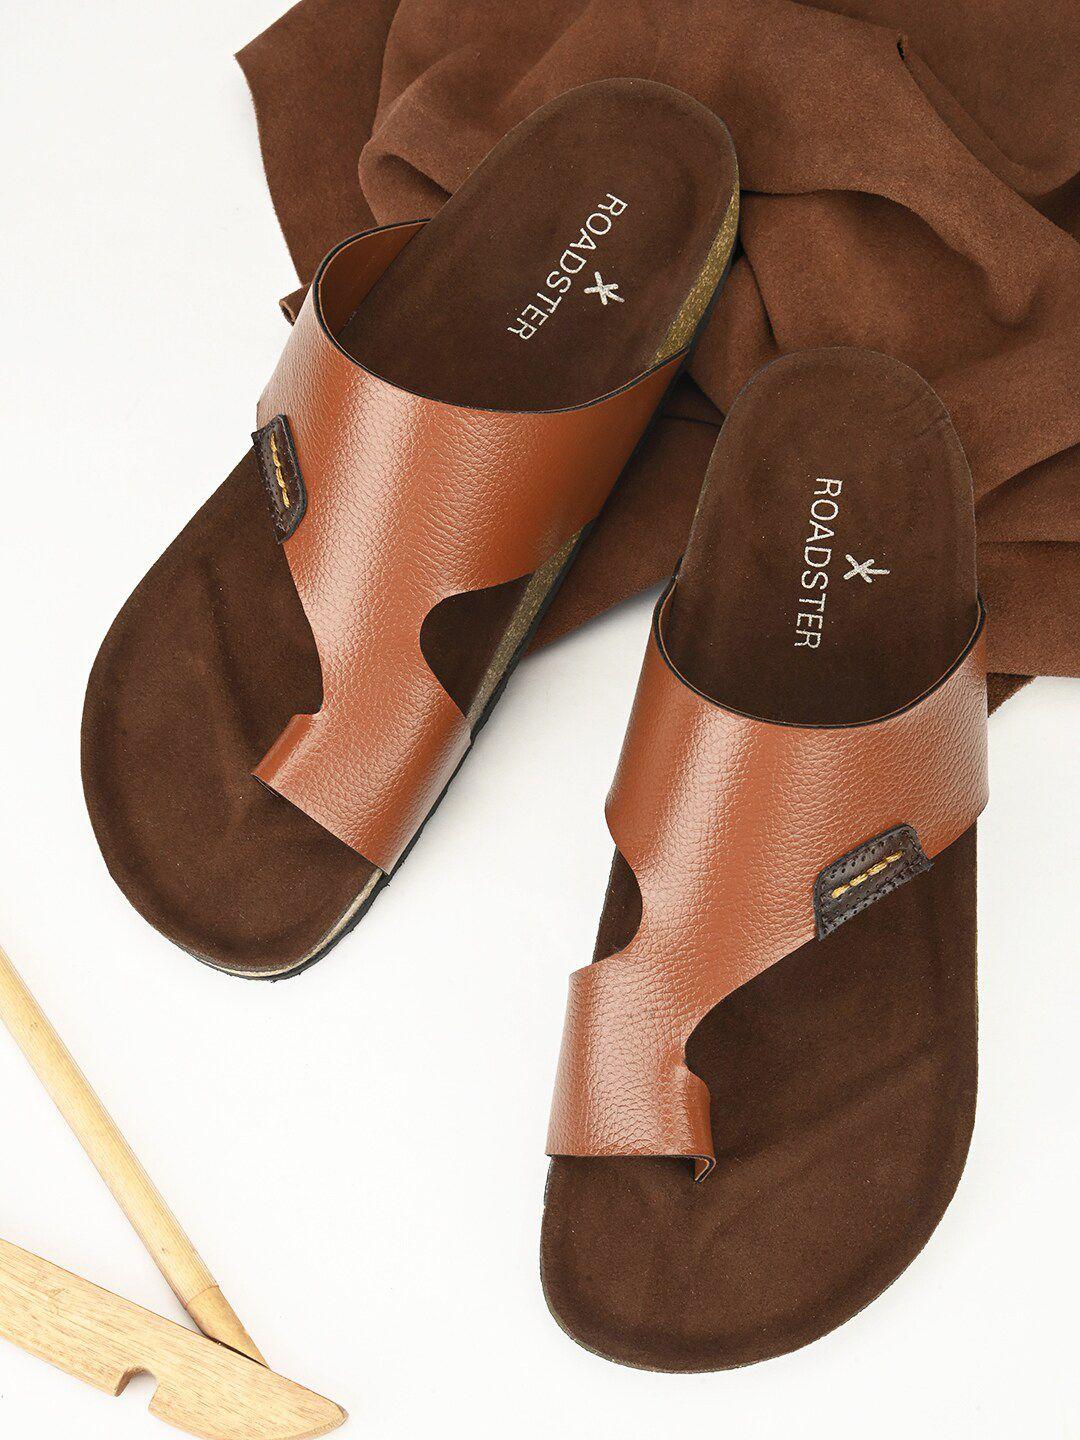 the-roadster-lifestyle-co.-leather-comfort-sandals